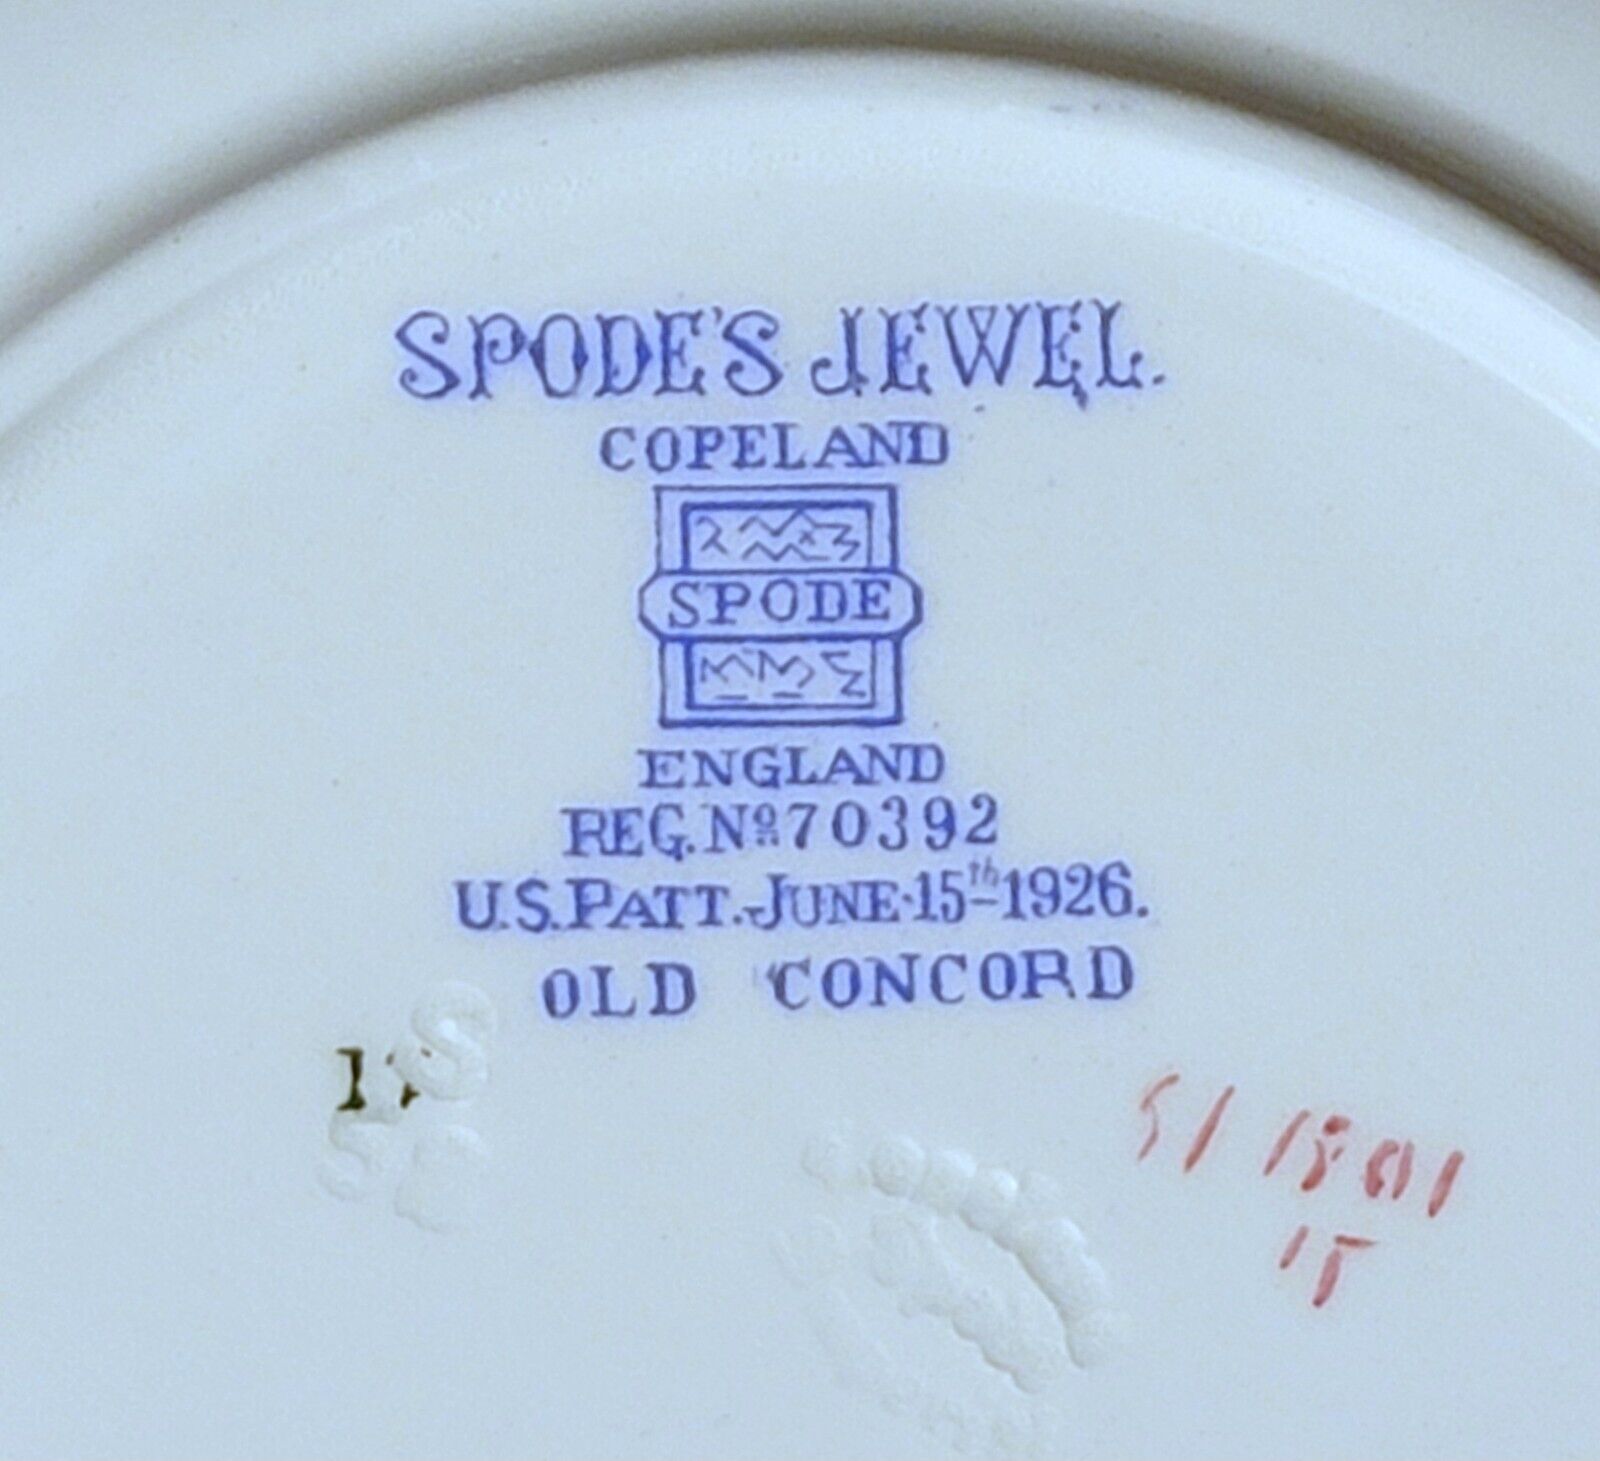 1926 Copeland Spode Jewel OLD CONCORD Cup and Saucer Set(s) Excellent Condition